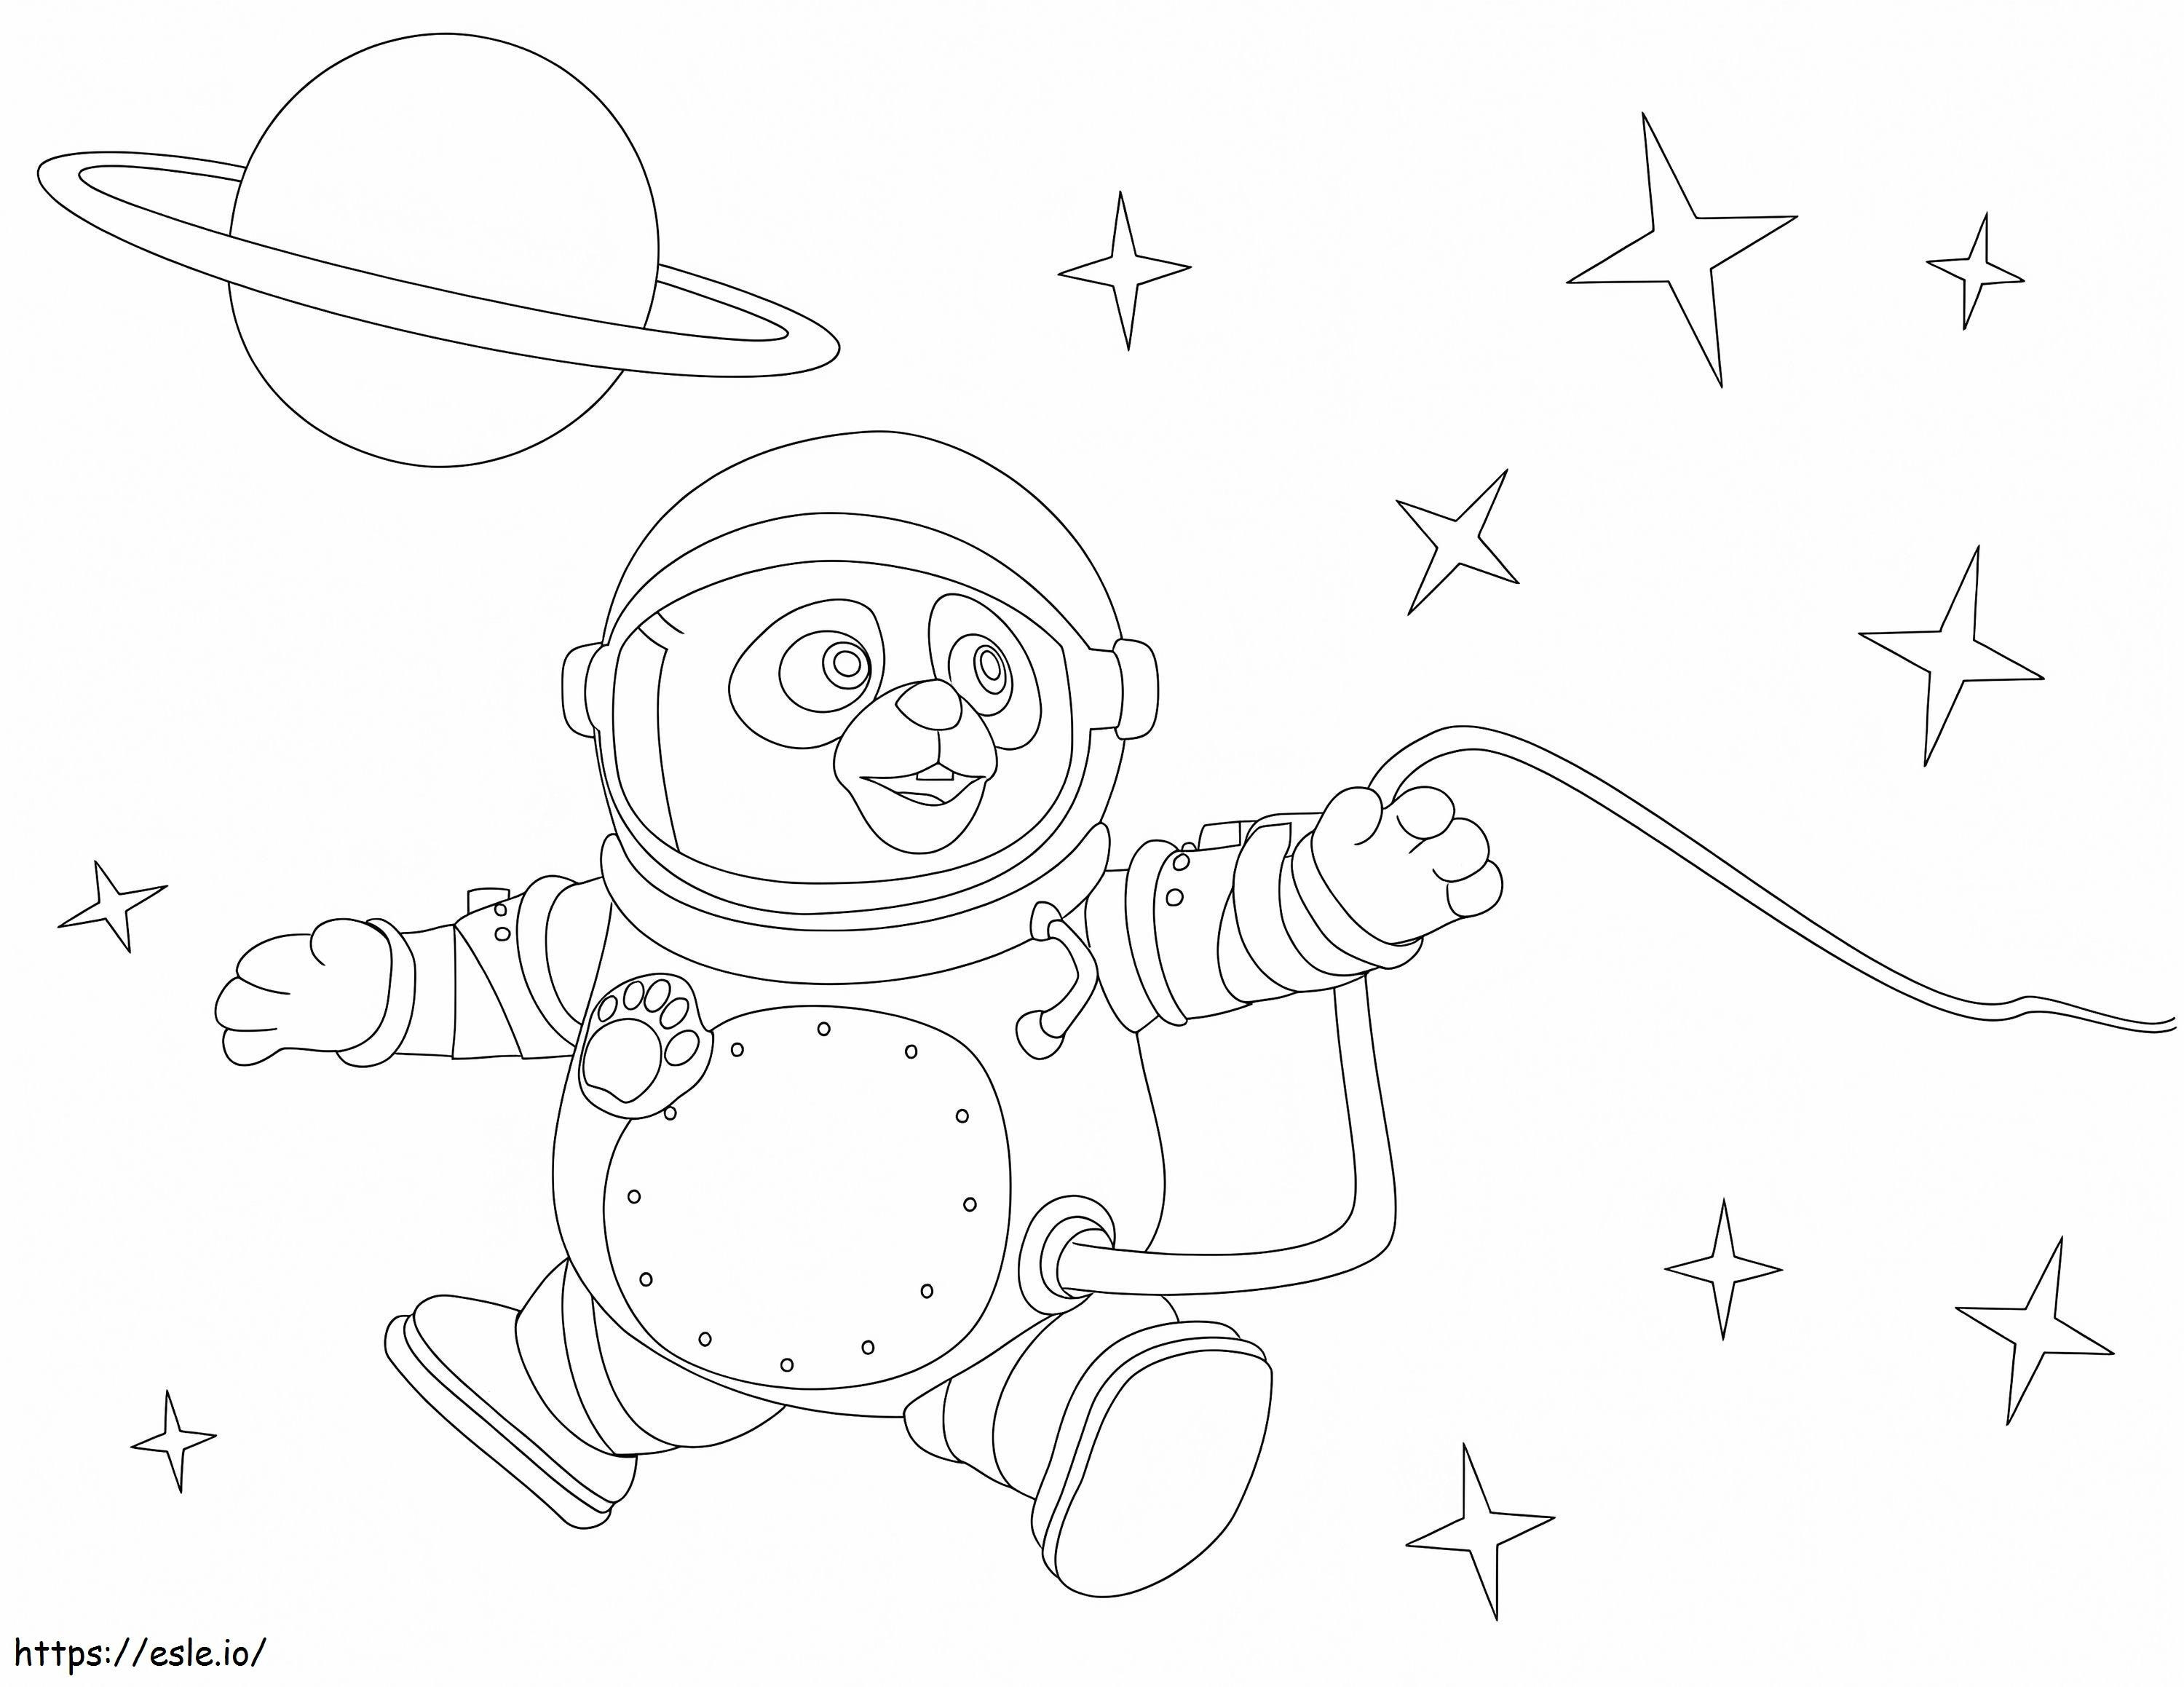 Special Agent Oso In Space coloring page